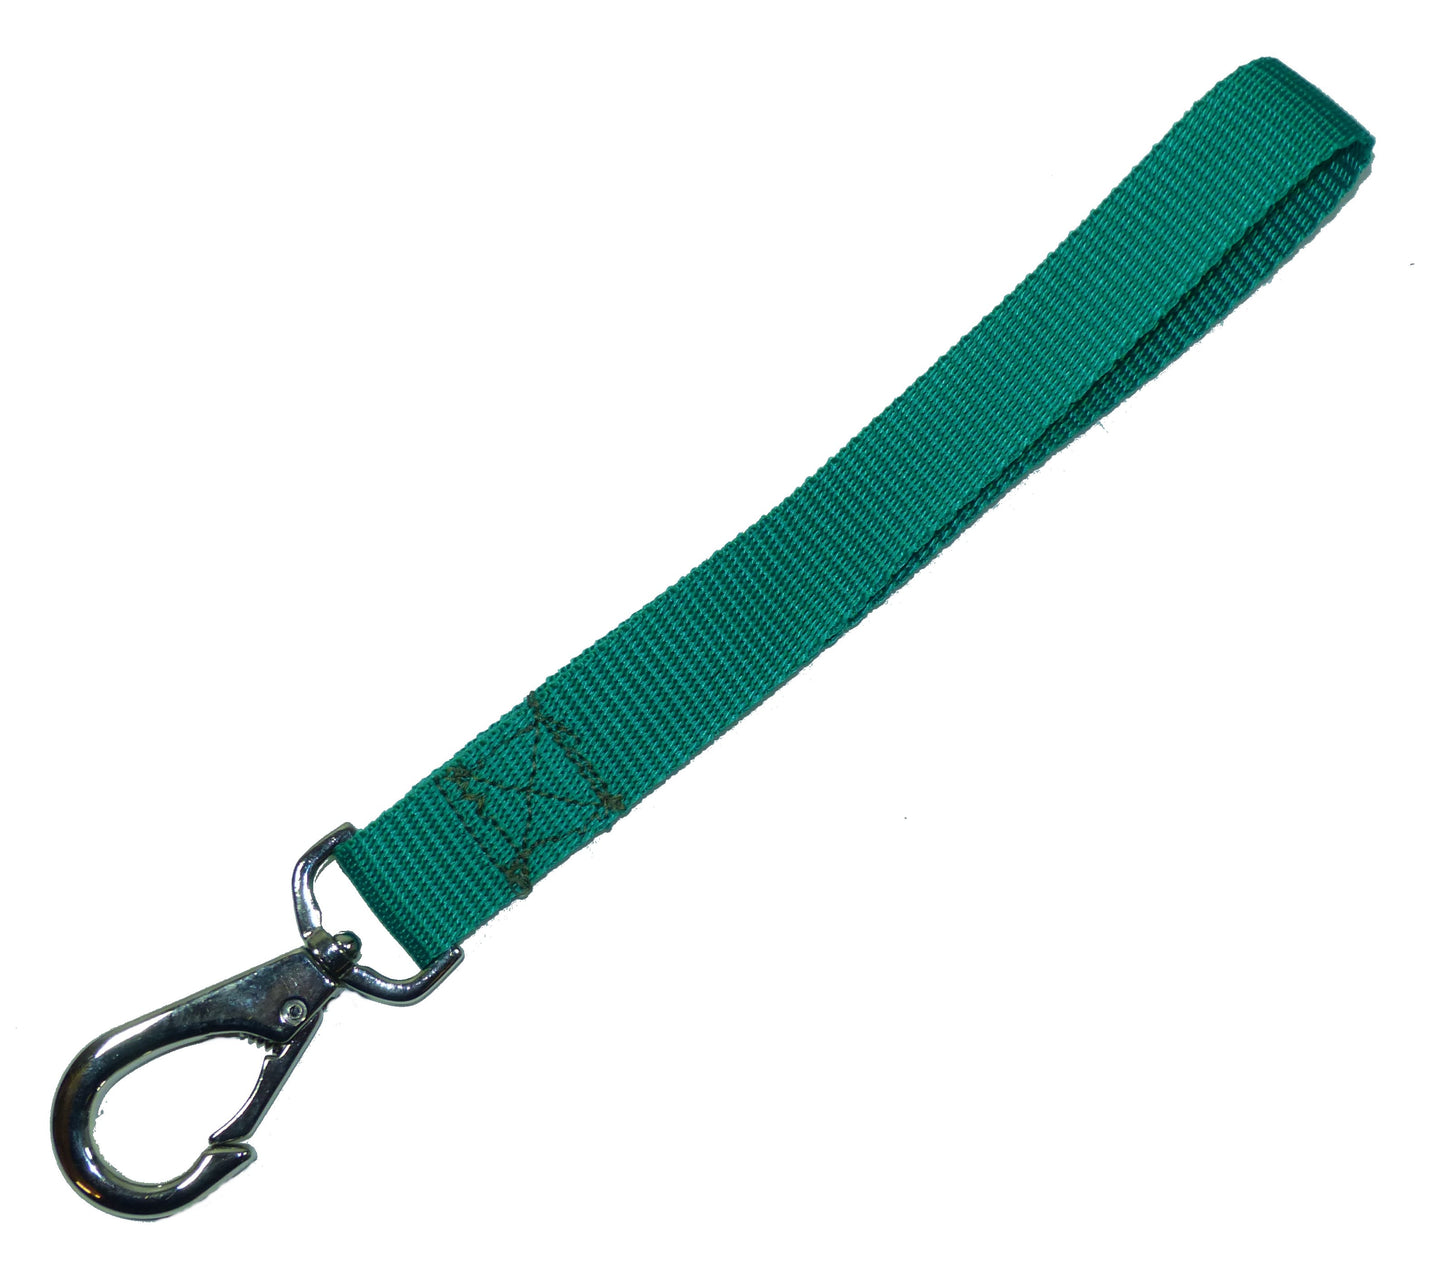 25mm Buggy Handle Carry Strap in emerald